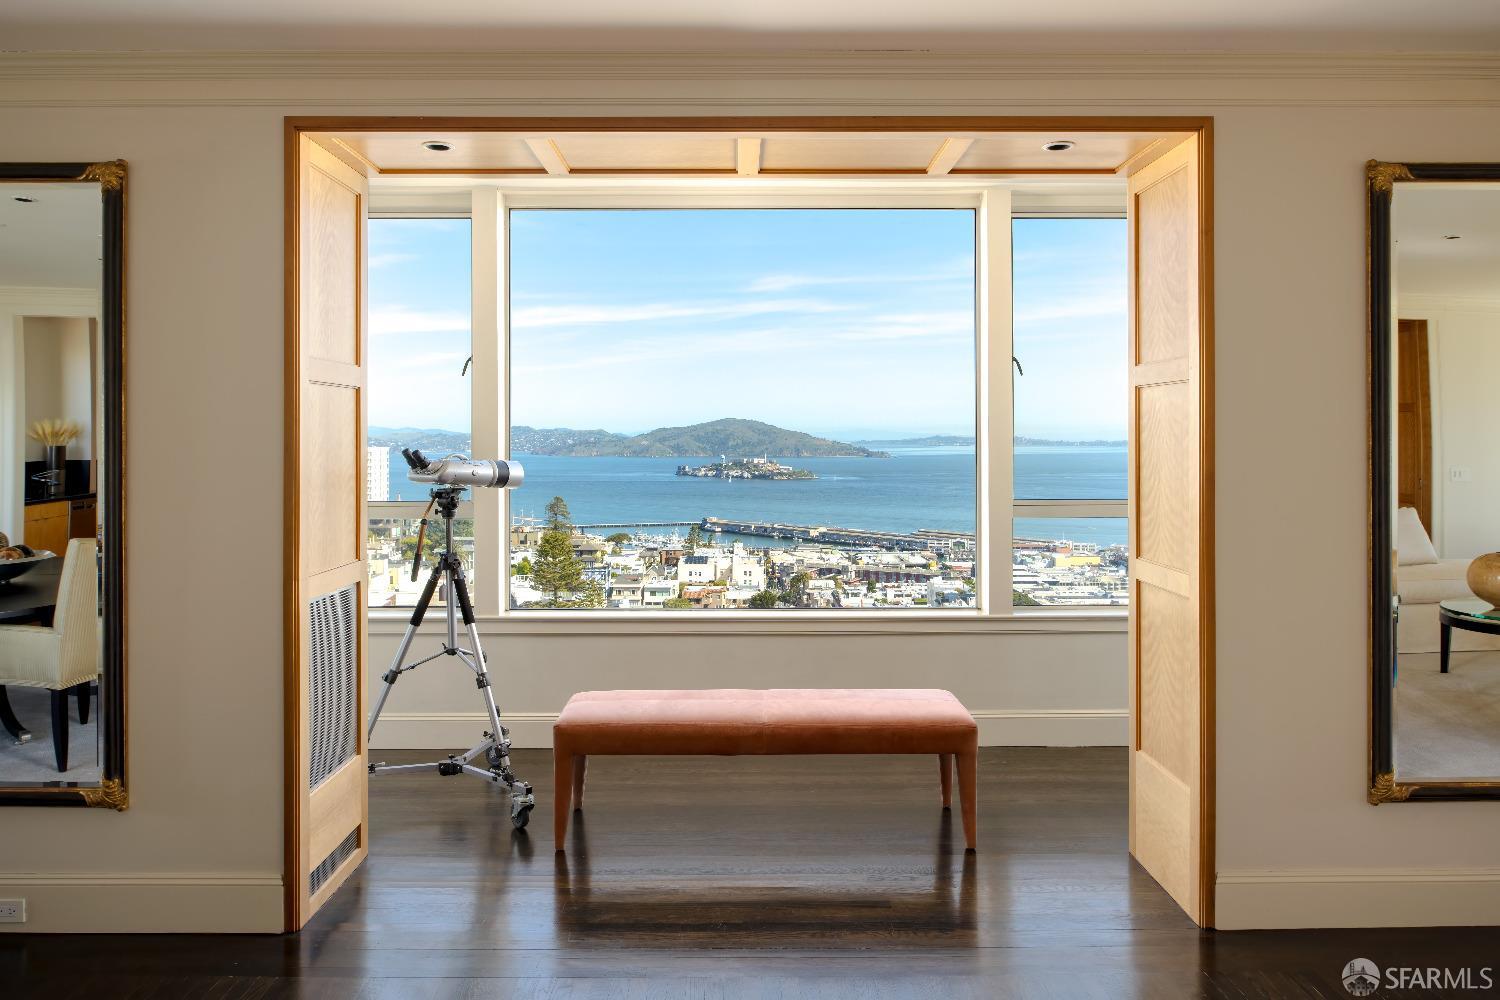 This distinguished co-op apartment is the only unit that encompasses an entire floor in this twelve-story circa 1929 building. The stately entrance, on a level block of Russian Hill, is staffed 24 hours and offers valet parking in addition to secure garage parking. With its full-floor design on the tenth floor, world-class picture postcard views wrap around the entire apartment from the towers of the Golden Gate Bridge to Alcatraz Island, Coit Tower, the entire Bay Bridge, and City skylines. Renovated from top to bottom with architecture by McEachron Architects, the interiors are masterfully appointed with designer style that begins from the moment of entry in the private elevator lobby. The foyer leads to the living and dining room combination which spans the width of the unit - perfect for entertaining.   Extending over approximately 5,300 square feet, this residence comprises 4 bedrooms with en suite baths plus 2 half-baths. A sizable library with Coit Tower views and hidden wet bar for entertaining rounds out the accommodations along with an oversized laundry room and significant storage throughout. Walk Score of 97, this home offers City convenience to Cable Car stops plus fine dining and cafes just blocks away, as well as George Sterling Park for recreation and tennis